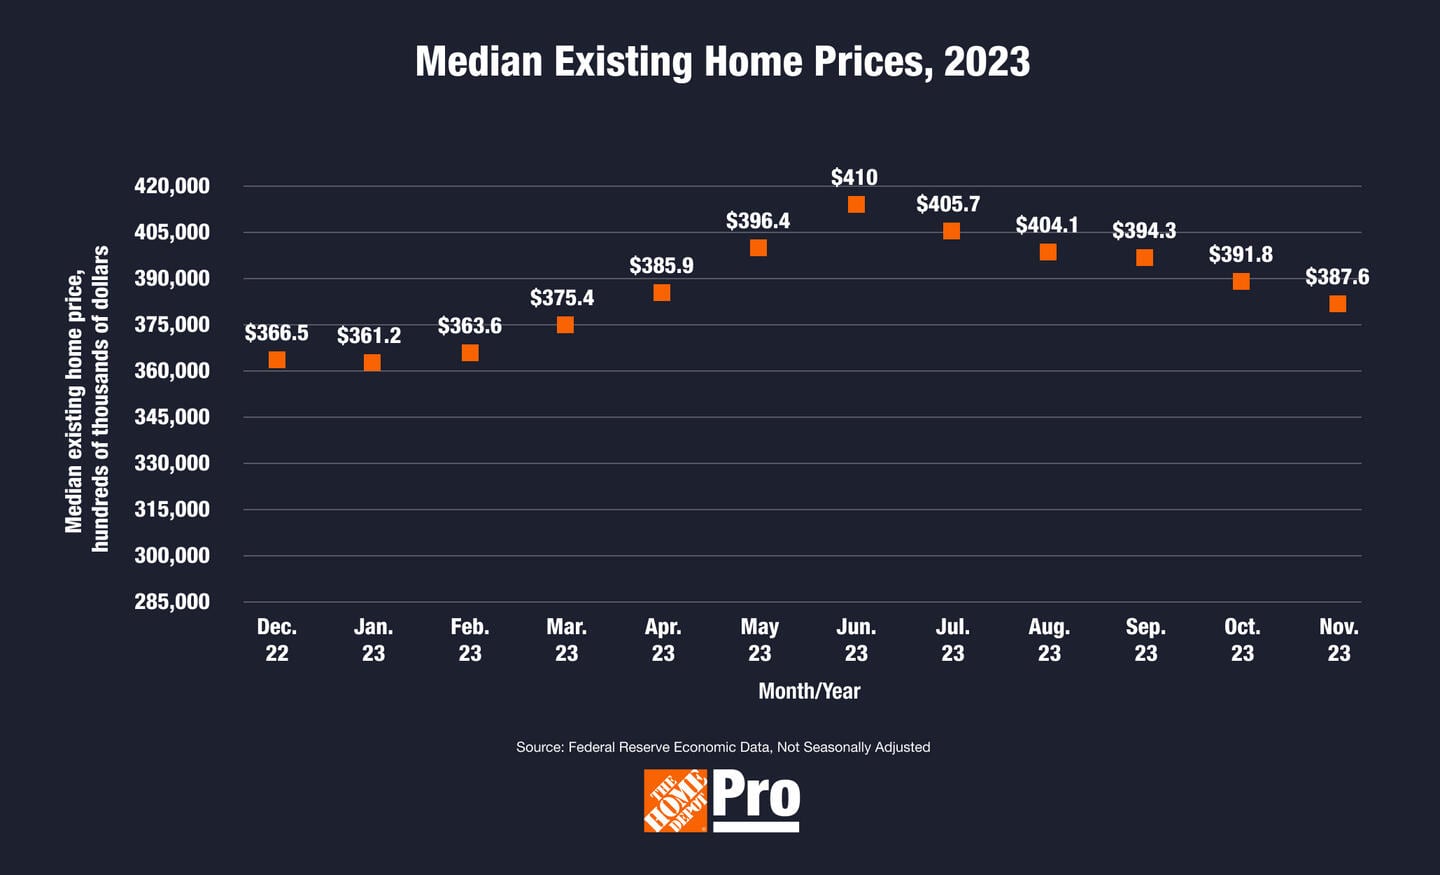 A graph shows median existing home prices for 2023.